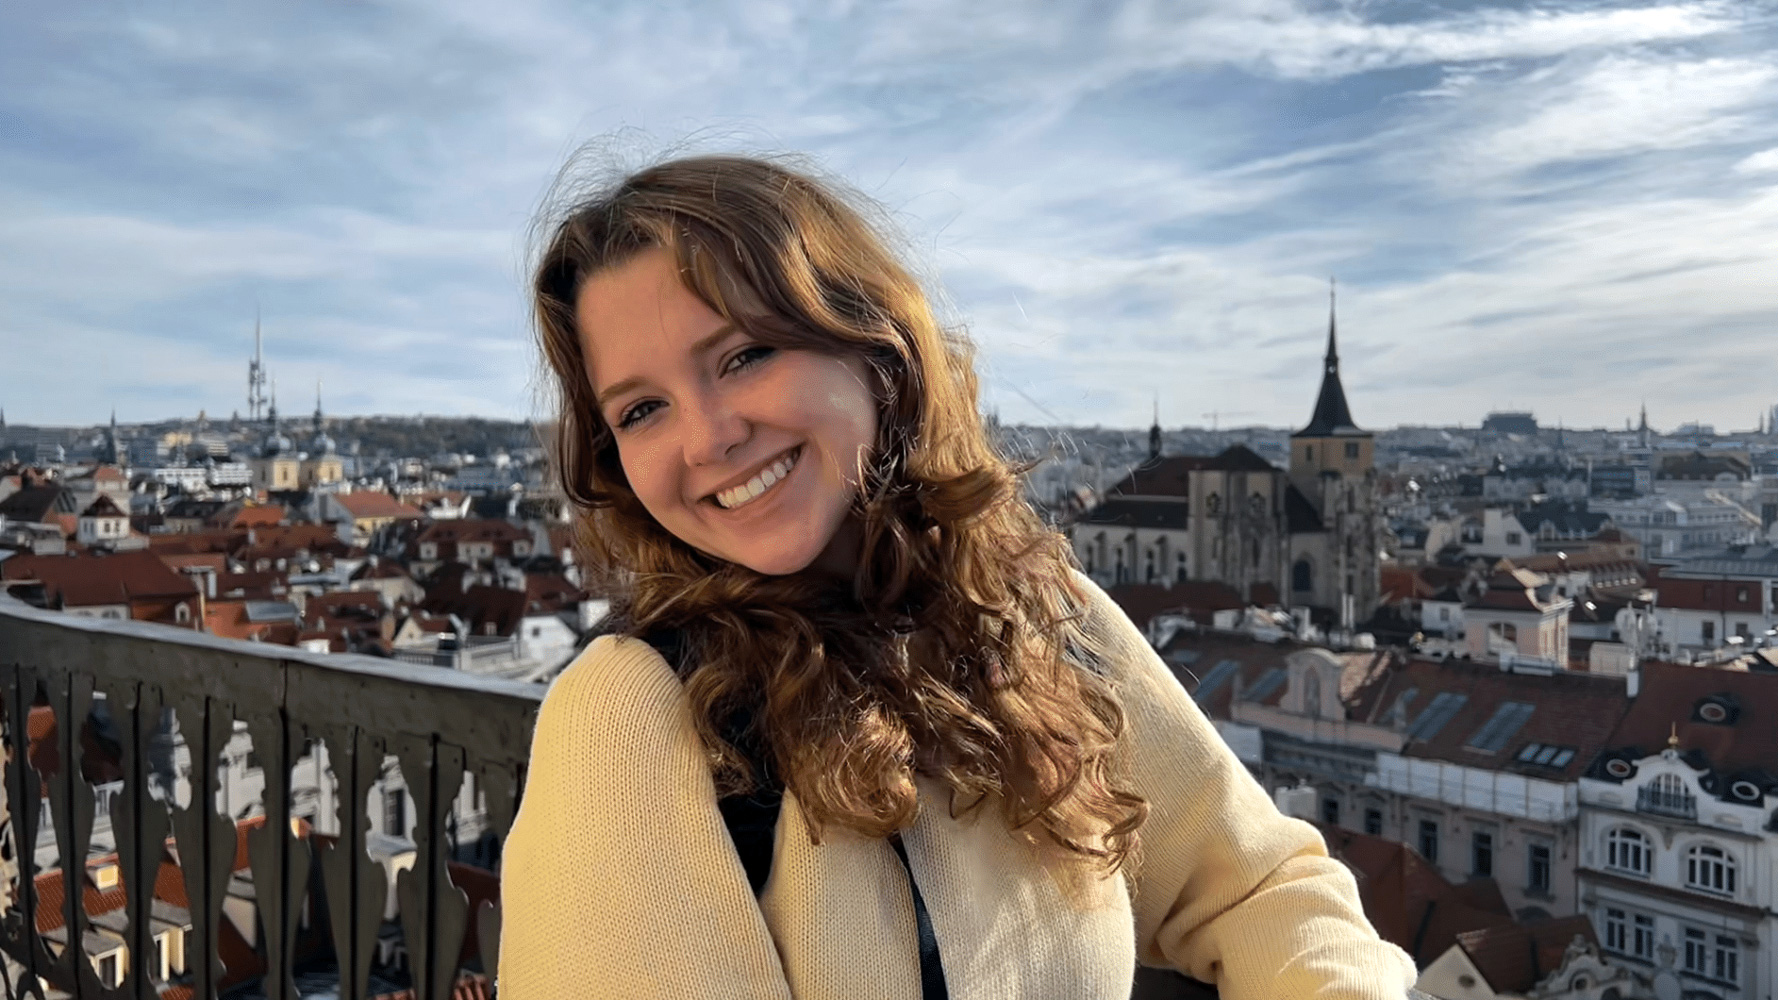 A student smiling posing with Prague cityscape in the background.